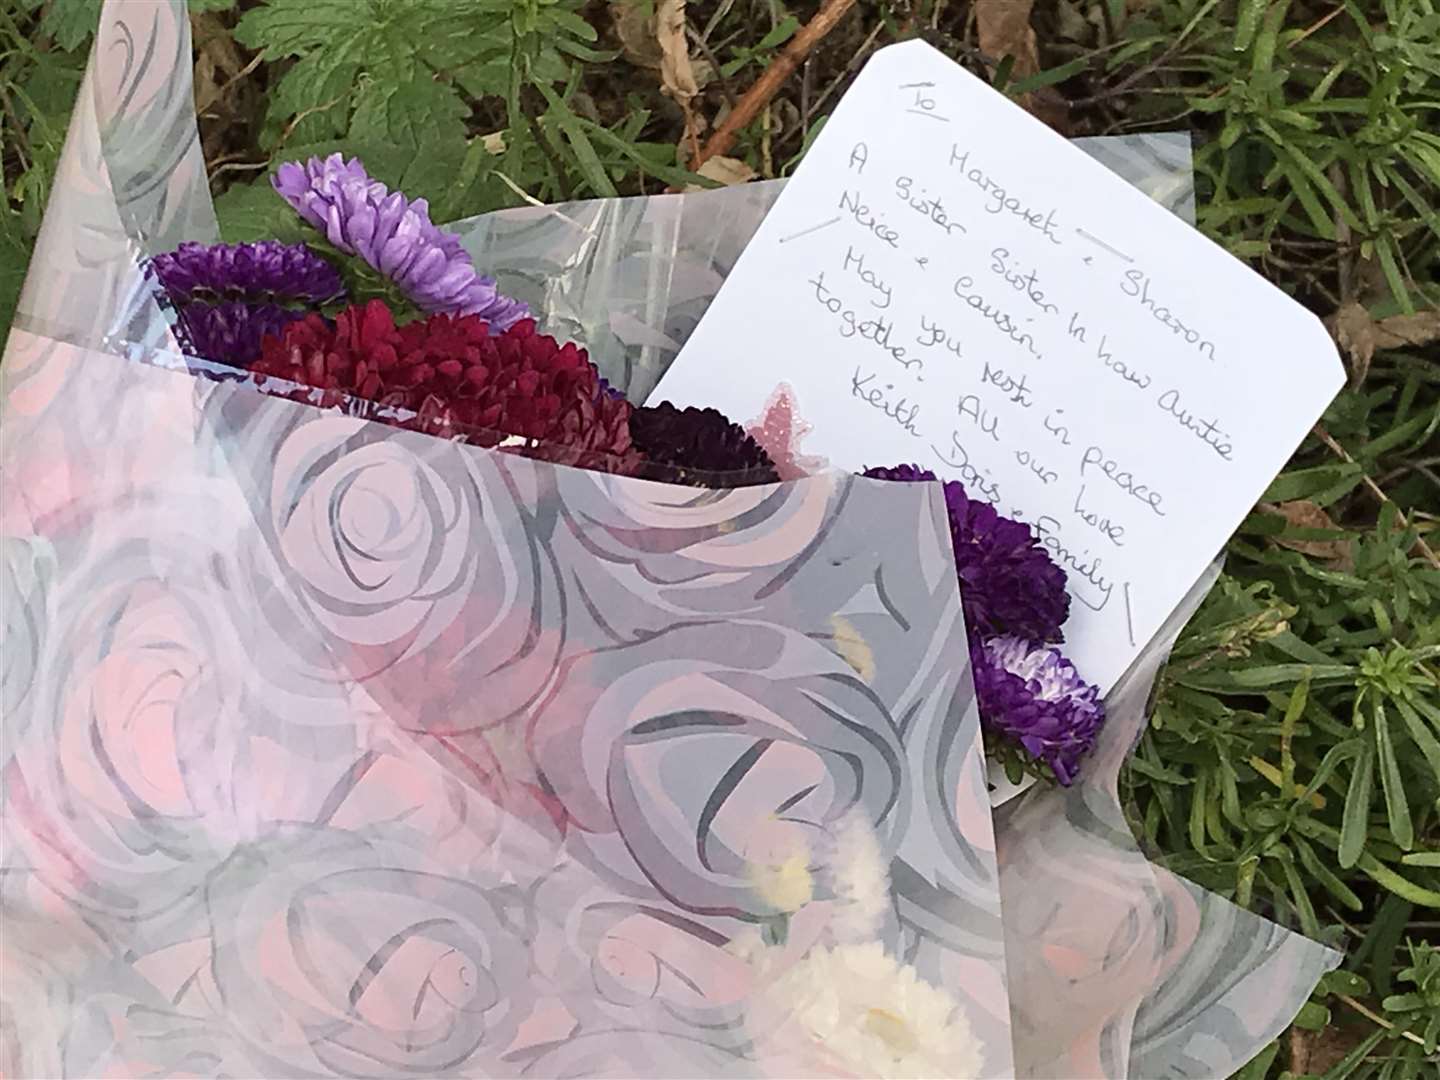 Floral tributes left in memory of Margaret and Sharon Harris (4546070)